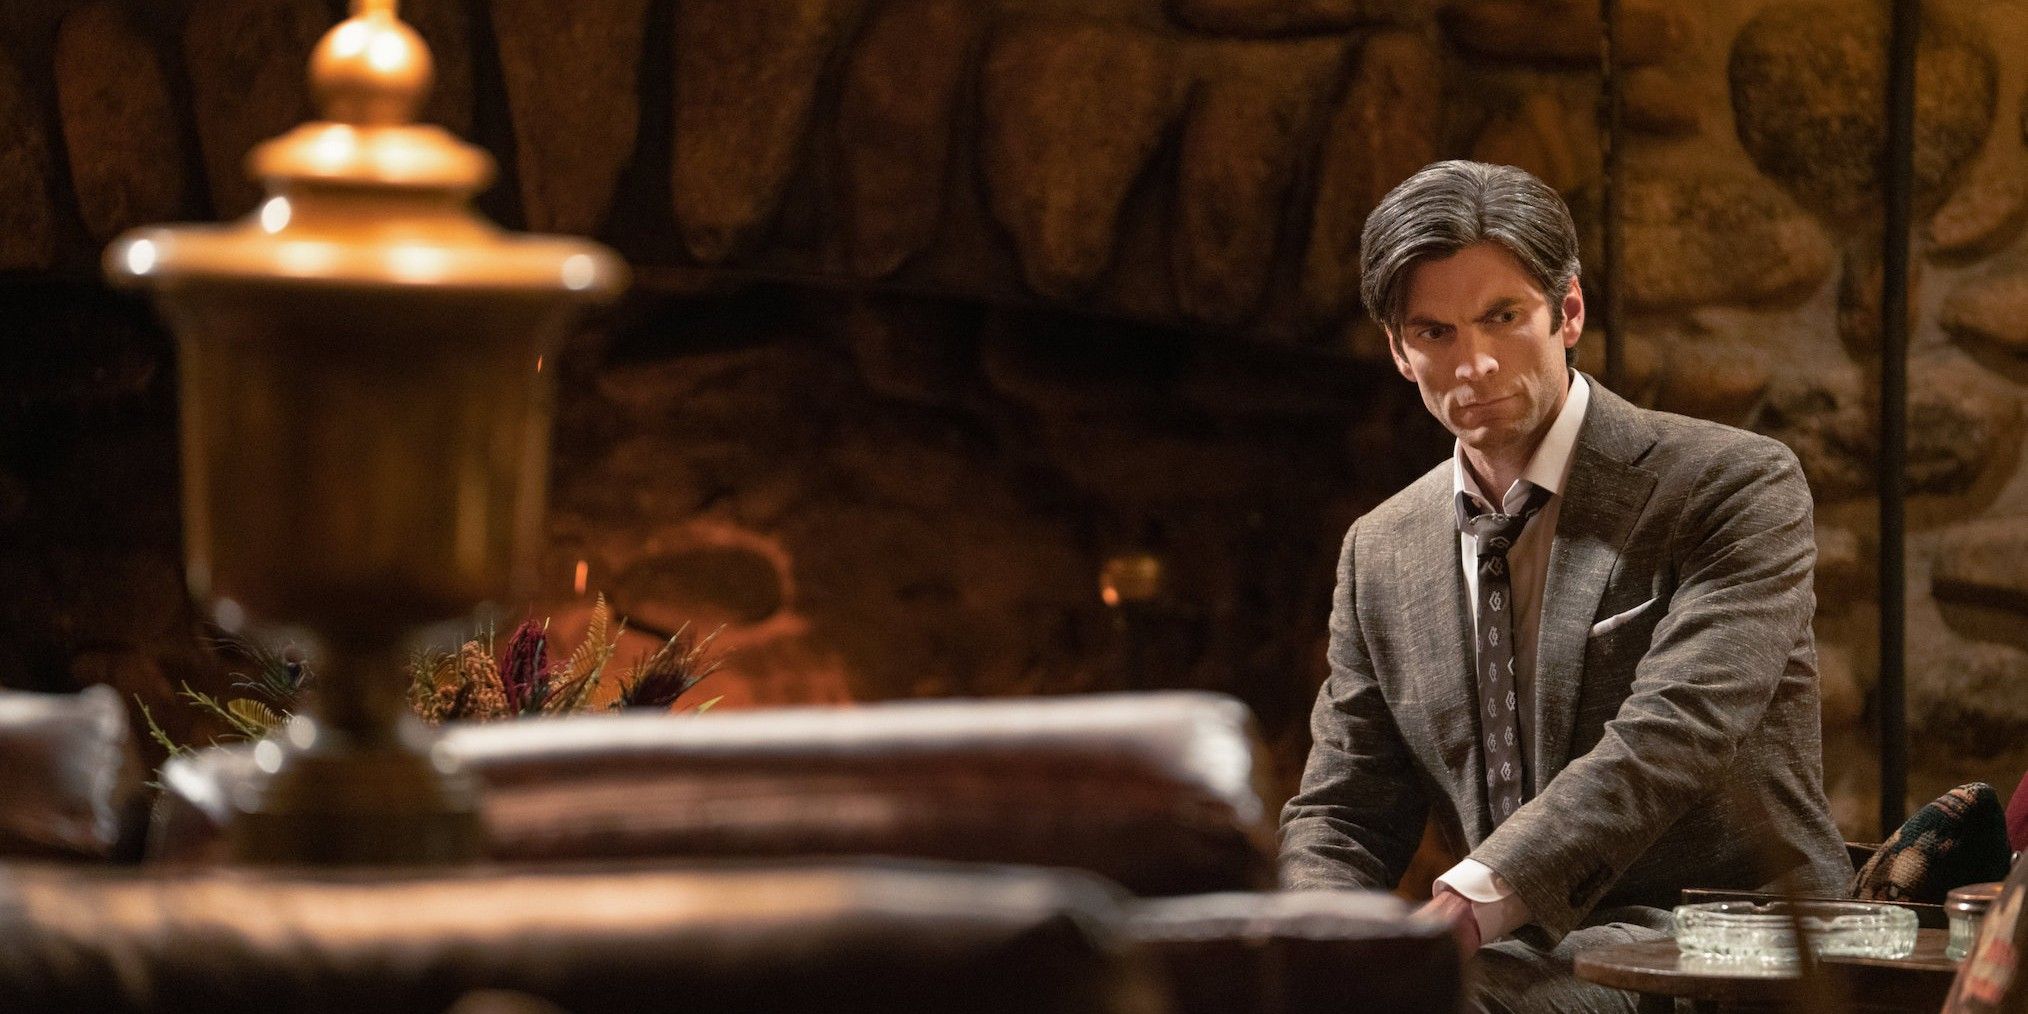 Yellowstone's Jamie Dutton (played by Wes Bentley) sits in front of a fireplace